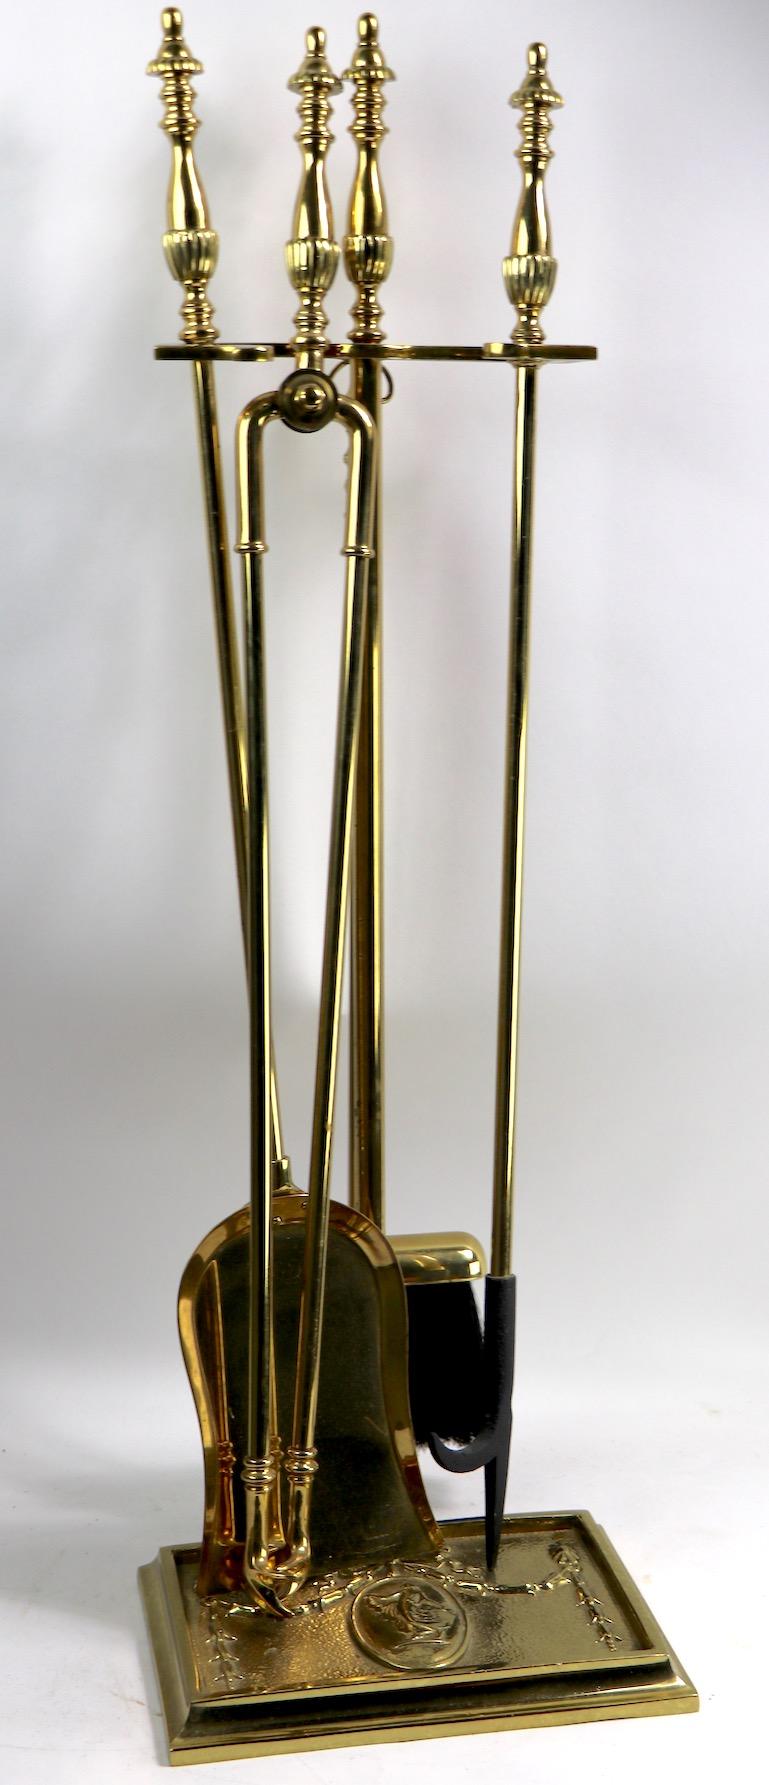 Decorative classical style brass fire tool set to include stand, poker, brush, shovel and tongs. The stand has a woman in flowing gown cast in relief. Original, clean and ready to use.